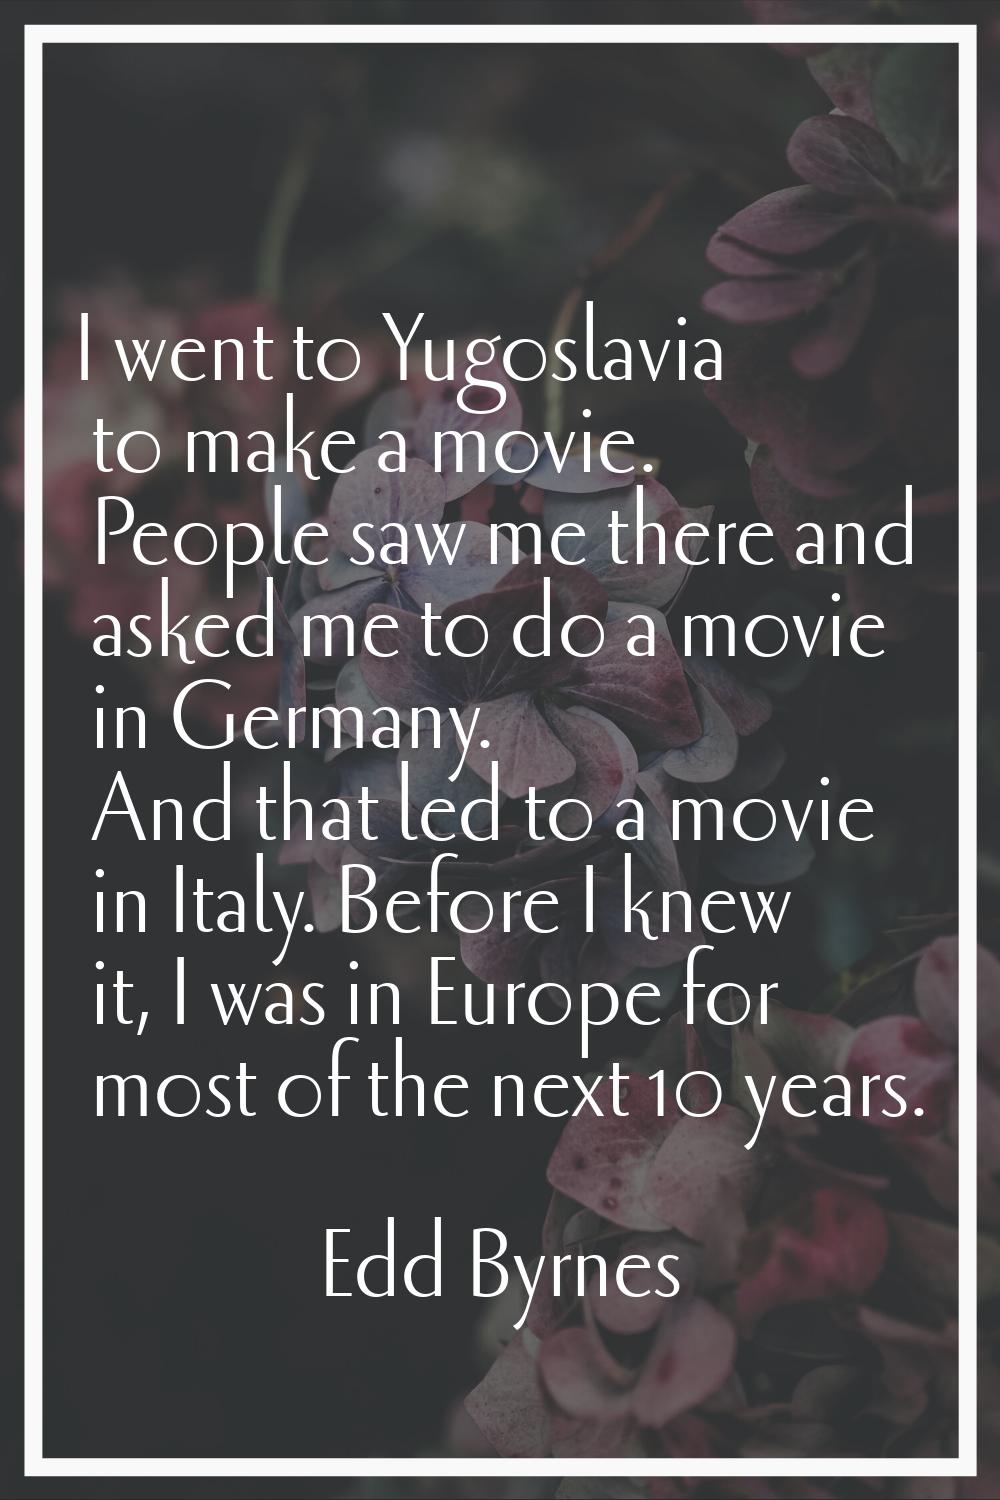 I went to Yugoslavia to make a movie. People saw me there and asked me to do a movie in Germany. An